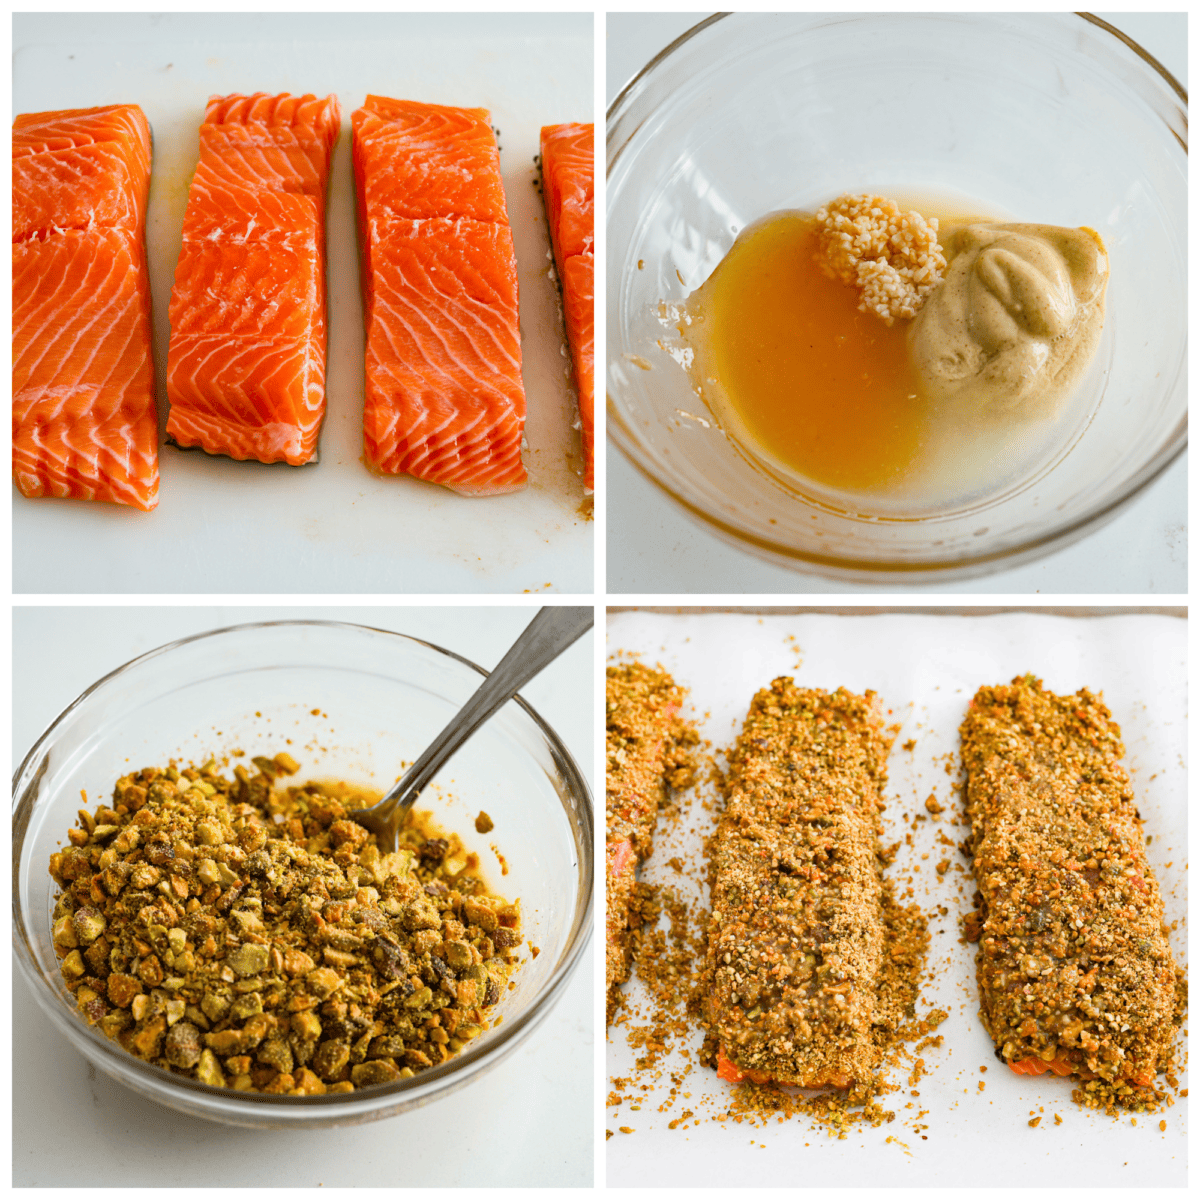 4-photo collage of the salmon filets and pistachio topping being prepared.